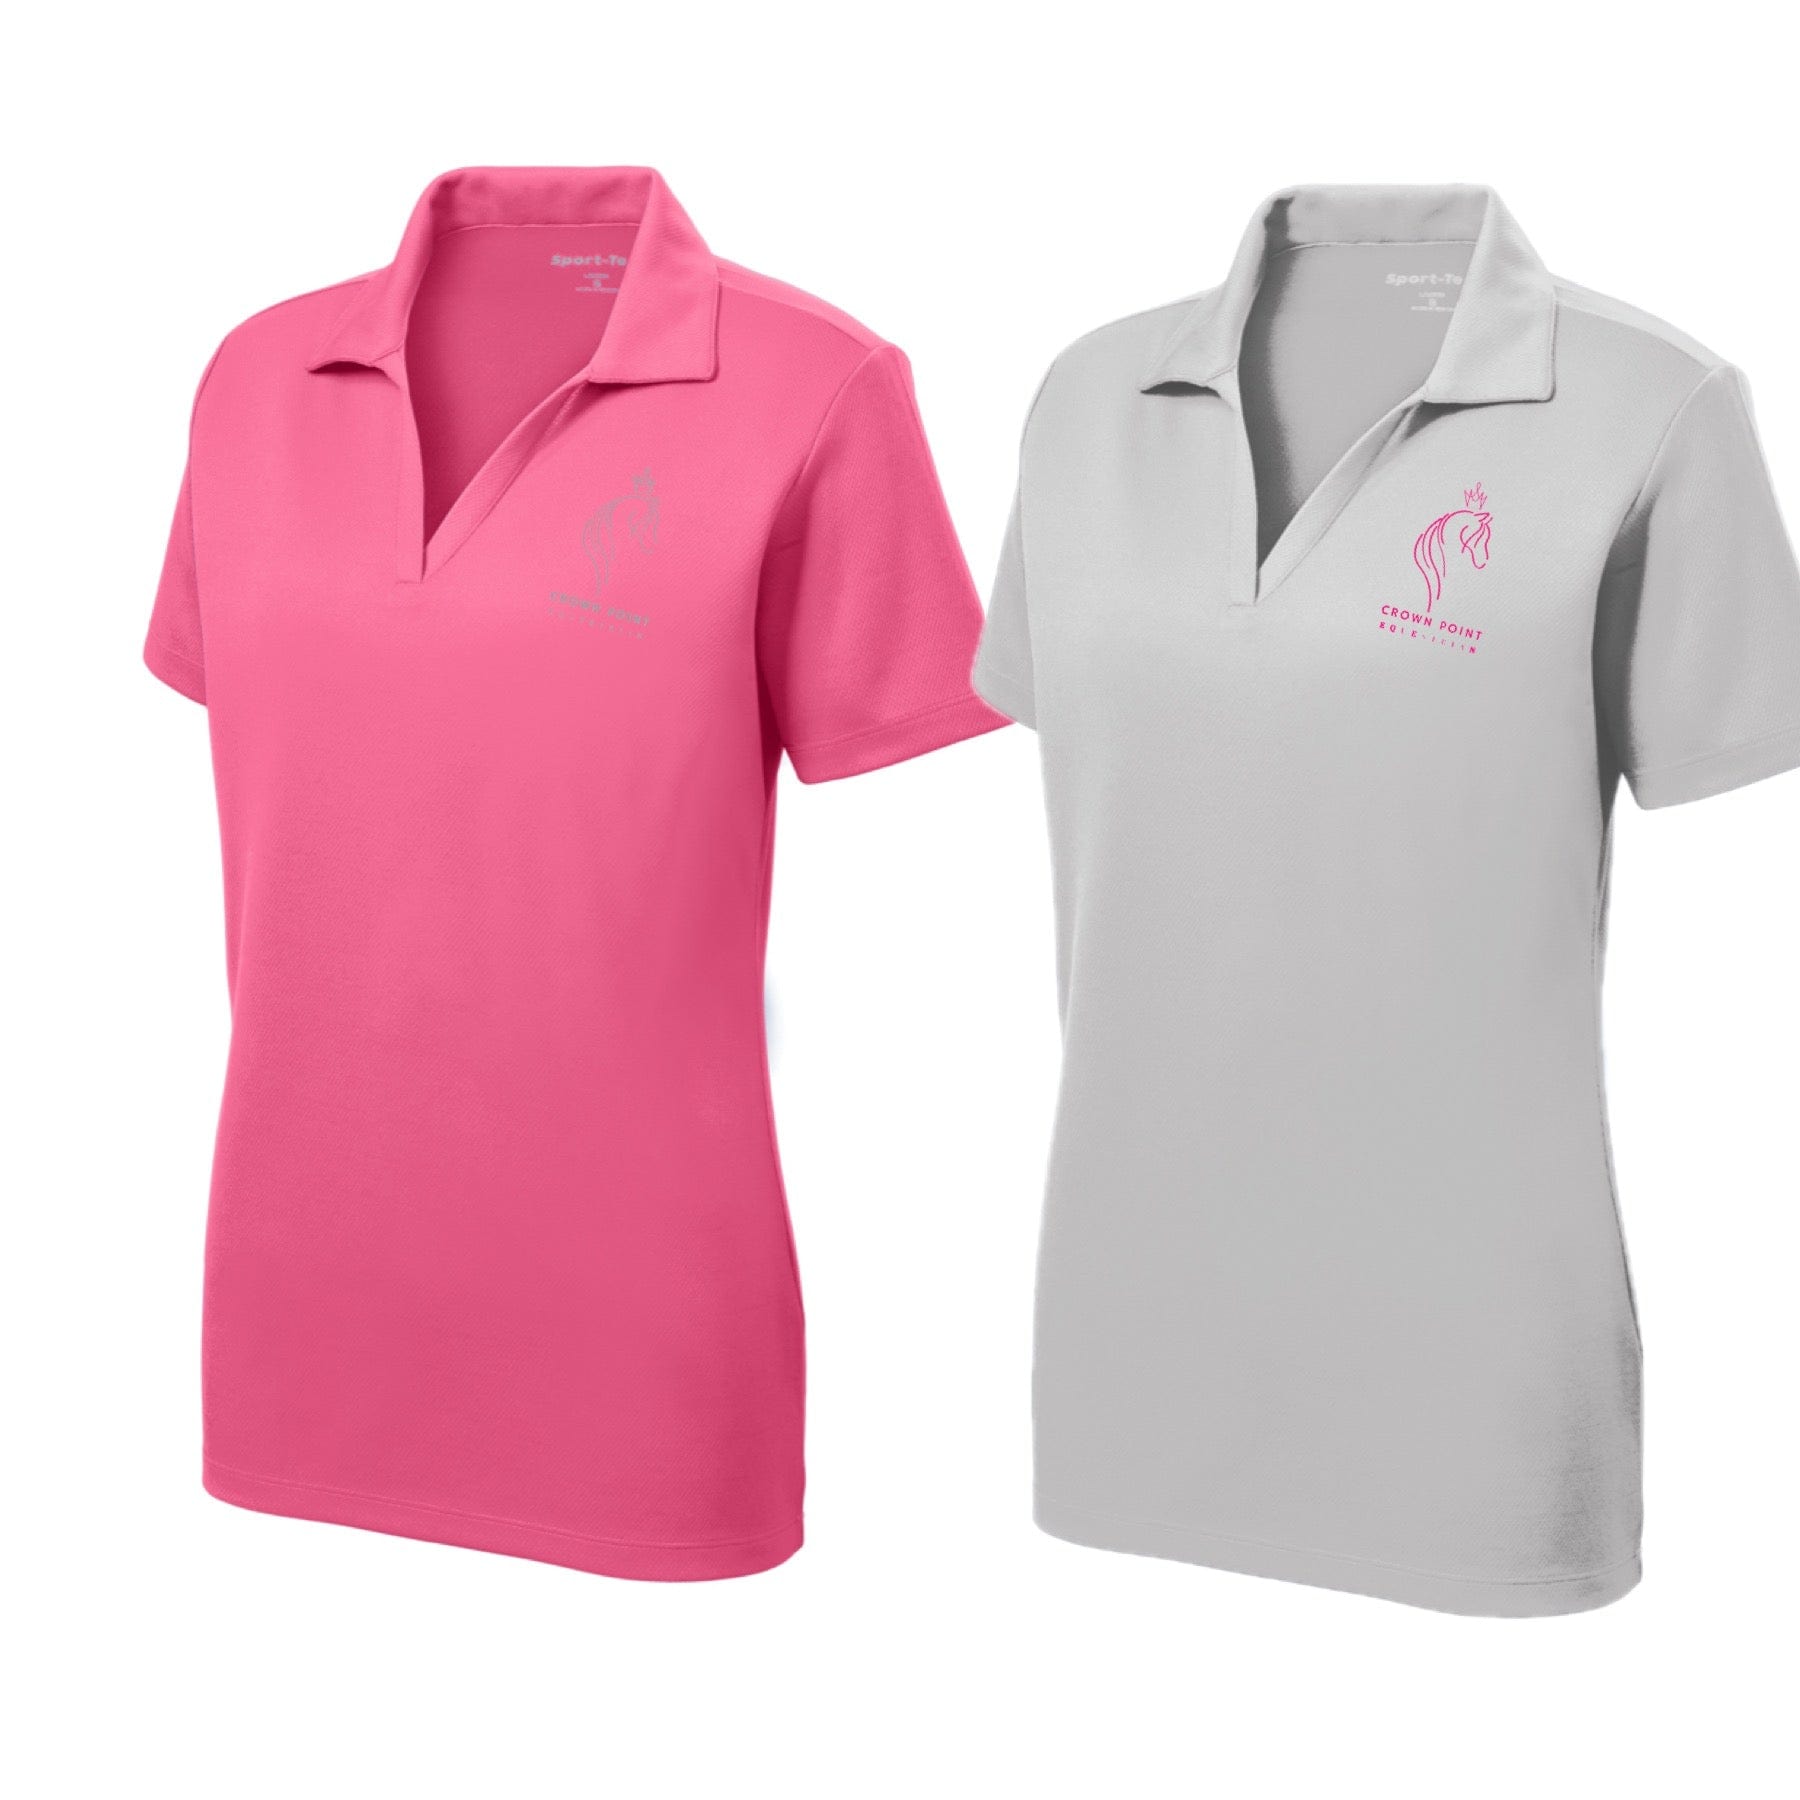 Equestrian Team Apparel Crown Point Equestrian Polo Shirt equestrian team apparel online tack store mobile tack store custom farm apparel custom show stable clothing equestrian lifestyle horse show clothing riding clothes horses equestrian tack store